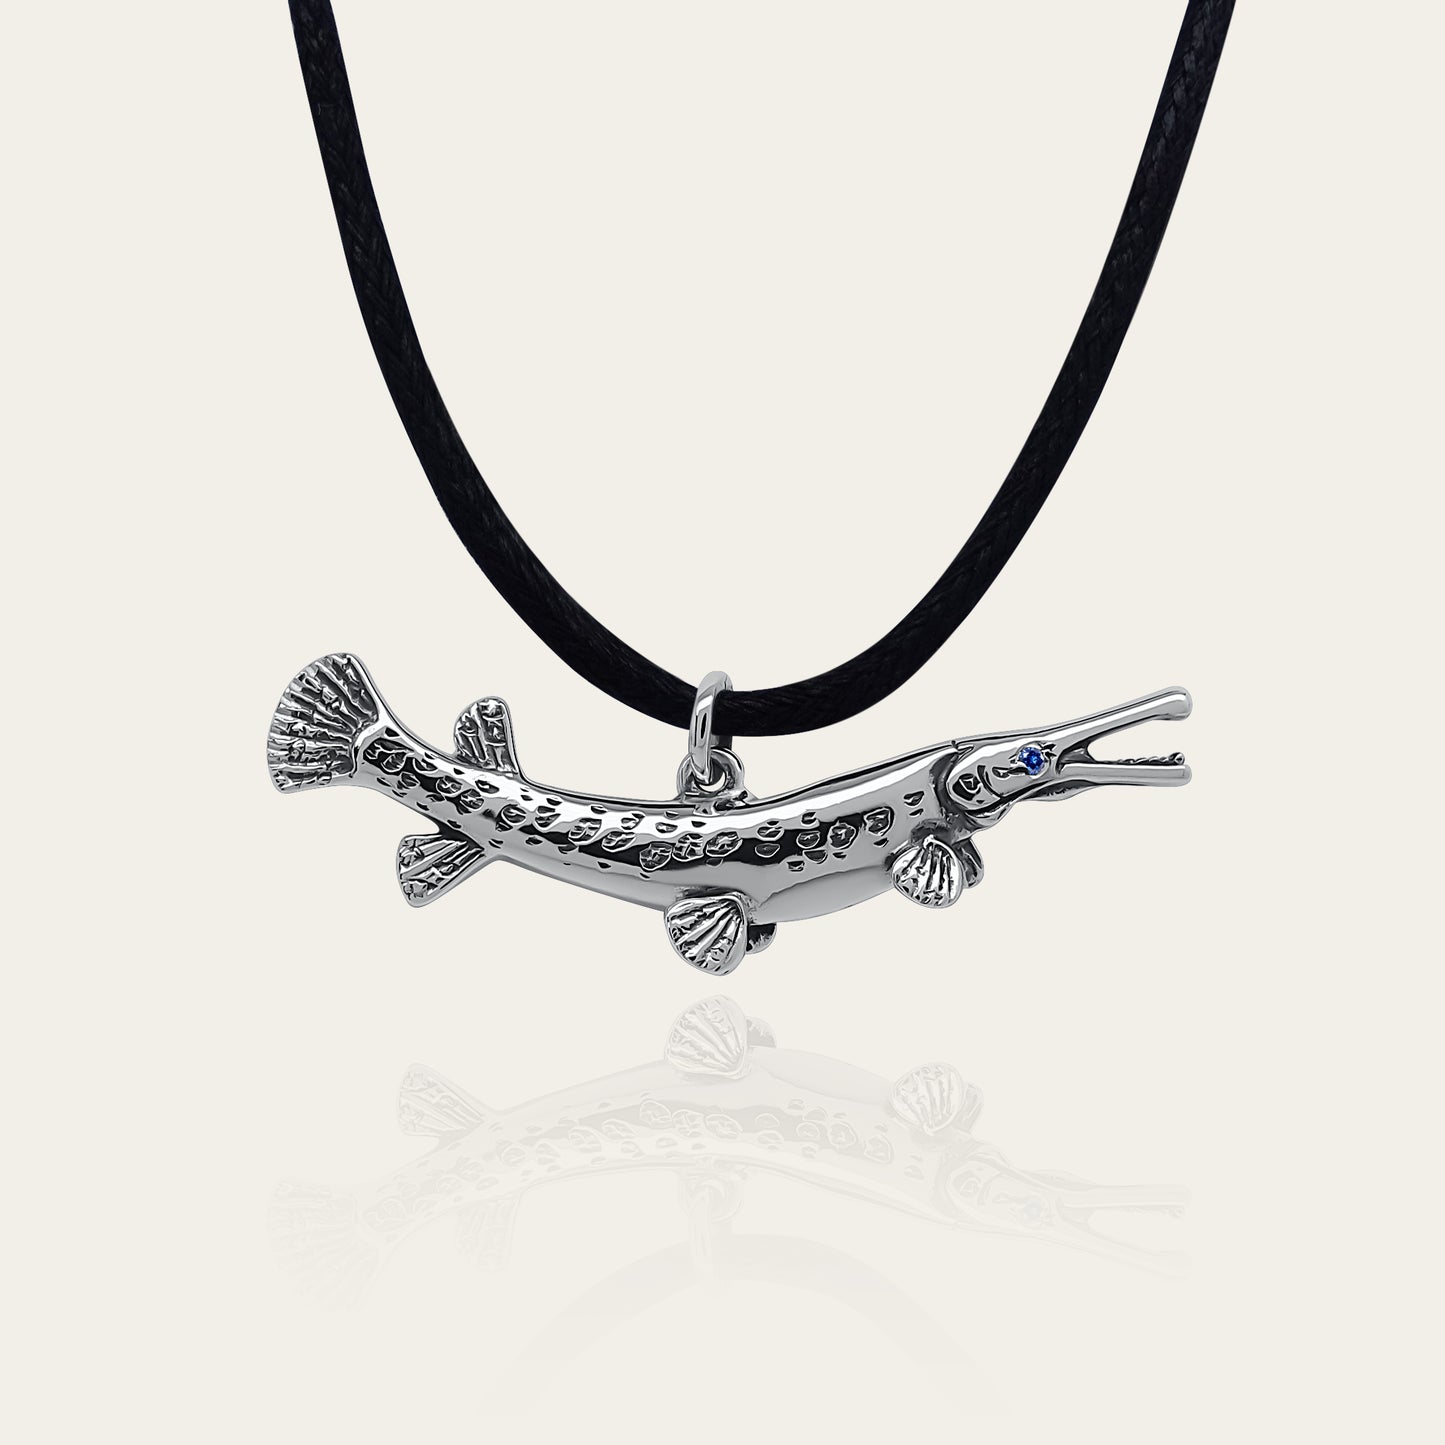 Gar pike necklace. Made from sterling silver with an antiqued finish, set with a gemstone eye. Alligator gar. Ideal fisherman’s angling gift © Adrian Ashley